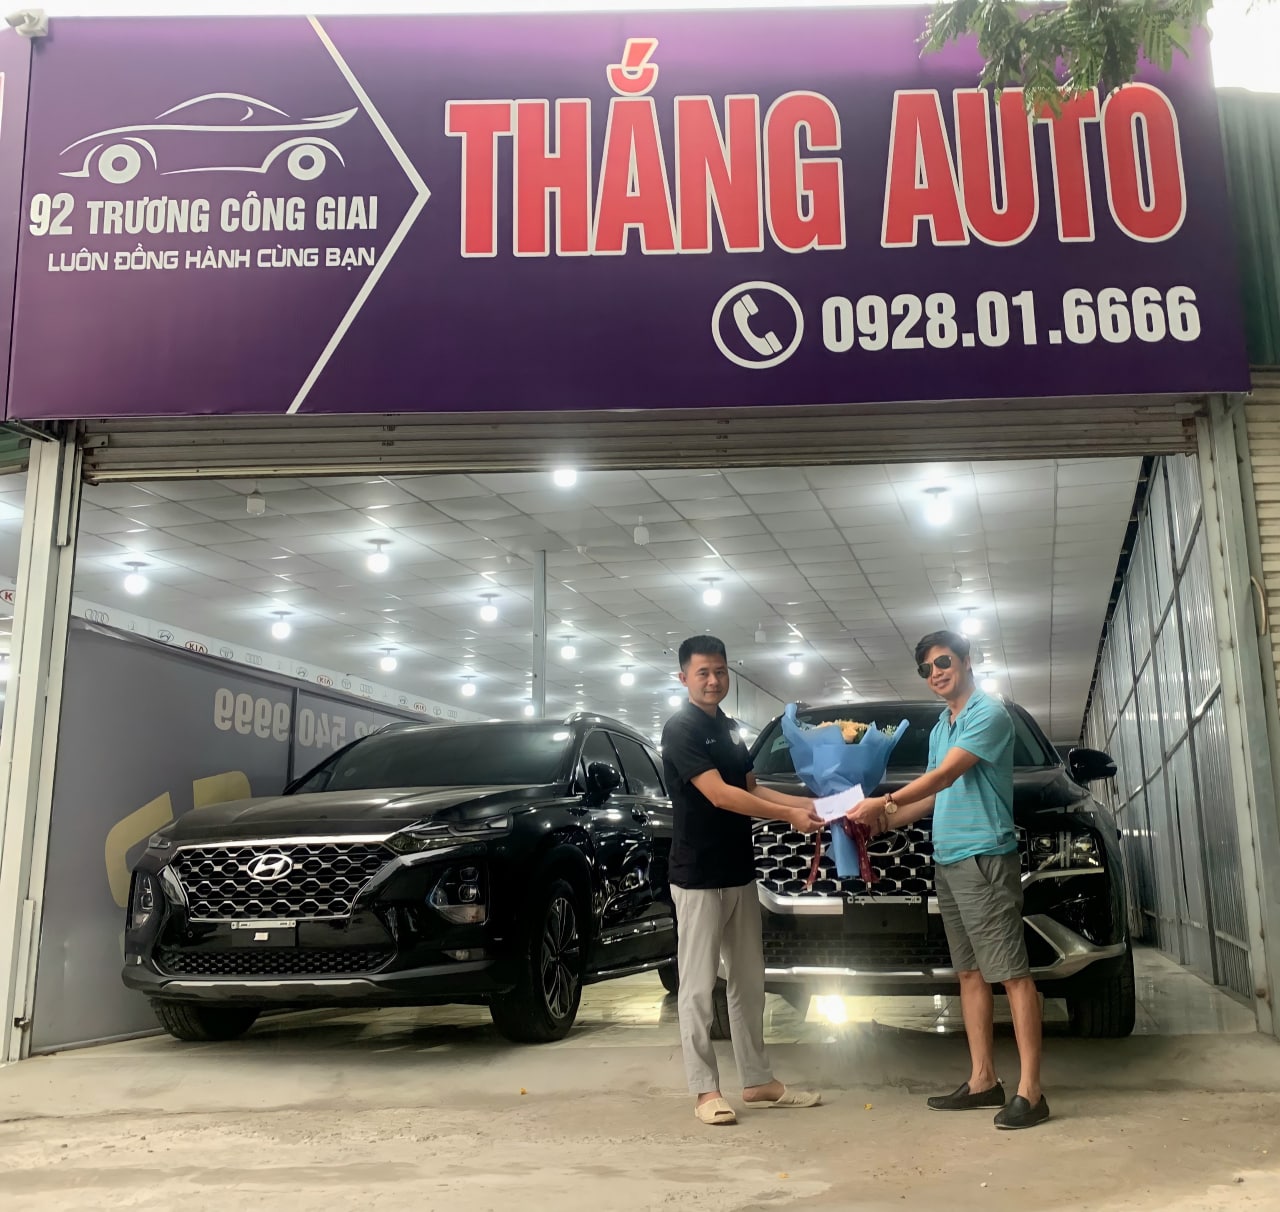 Thắng Auto